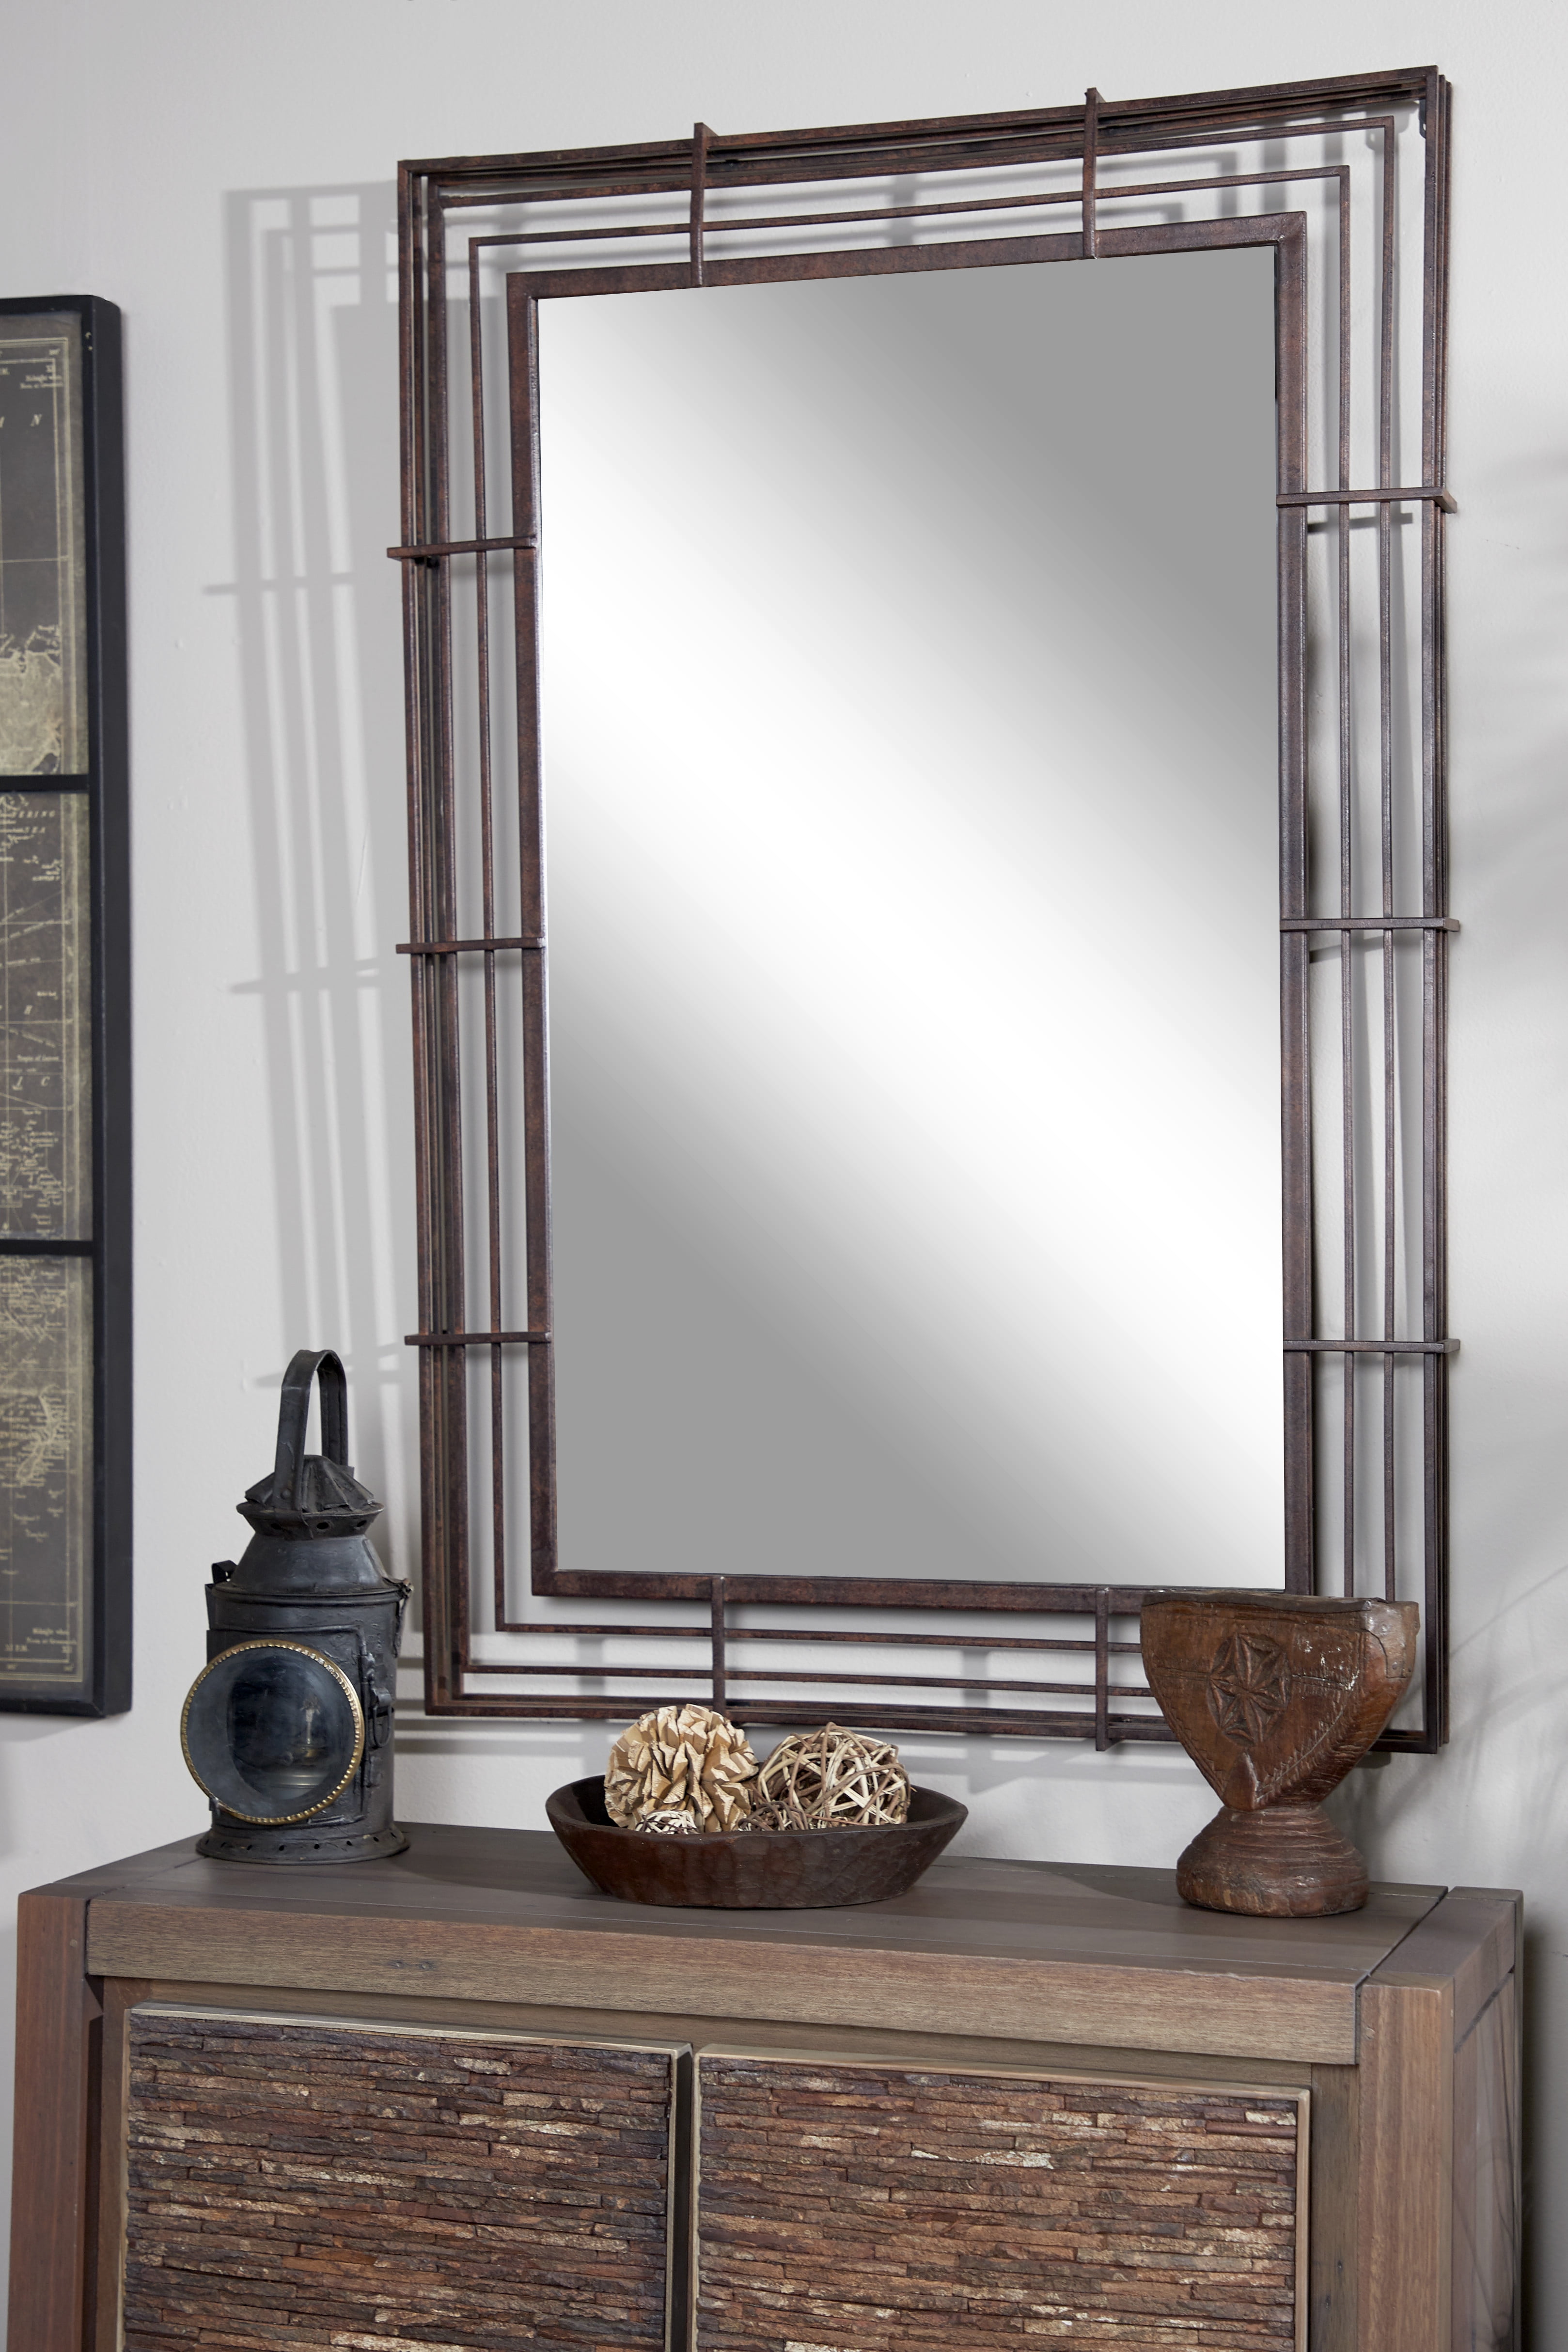 Decmode - Large Rectangular Industrial Wrought Iron Wall Mirror with